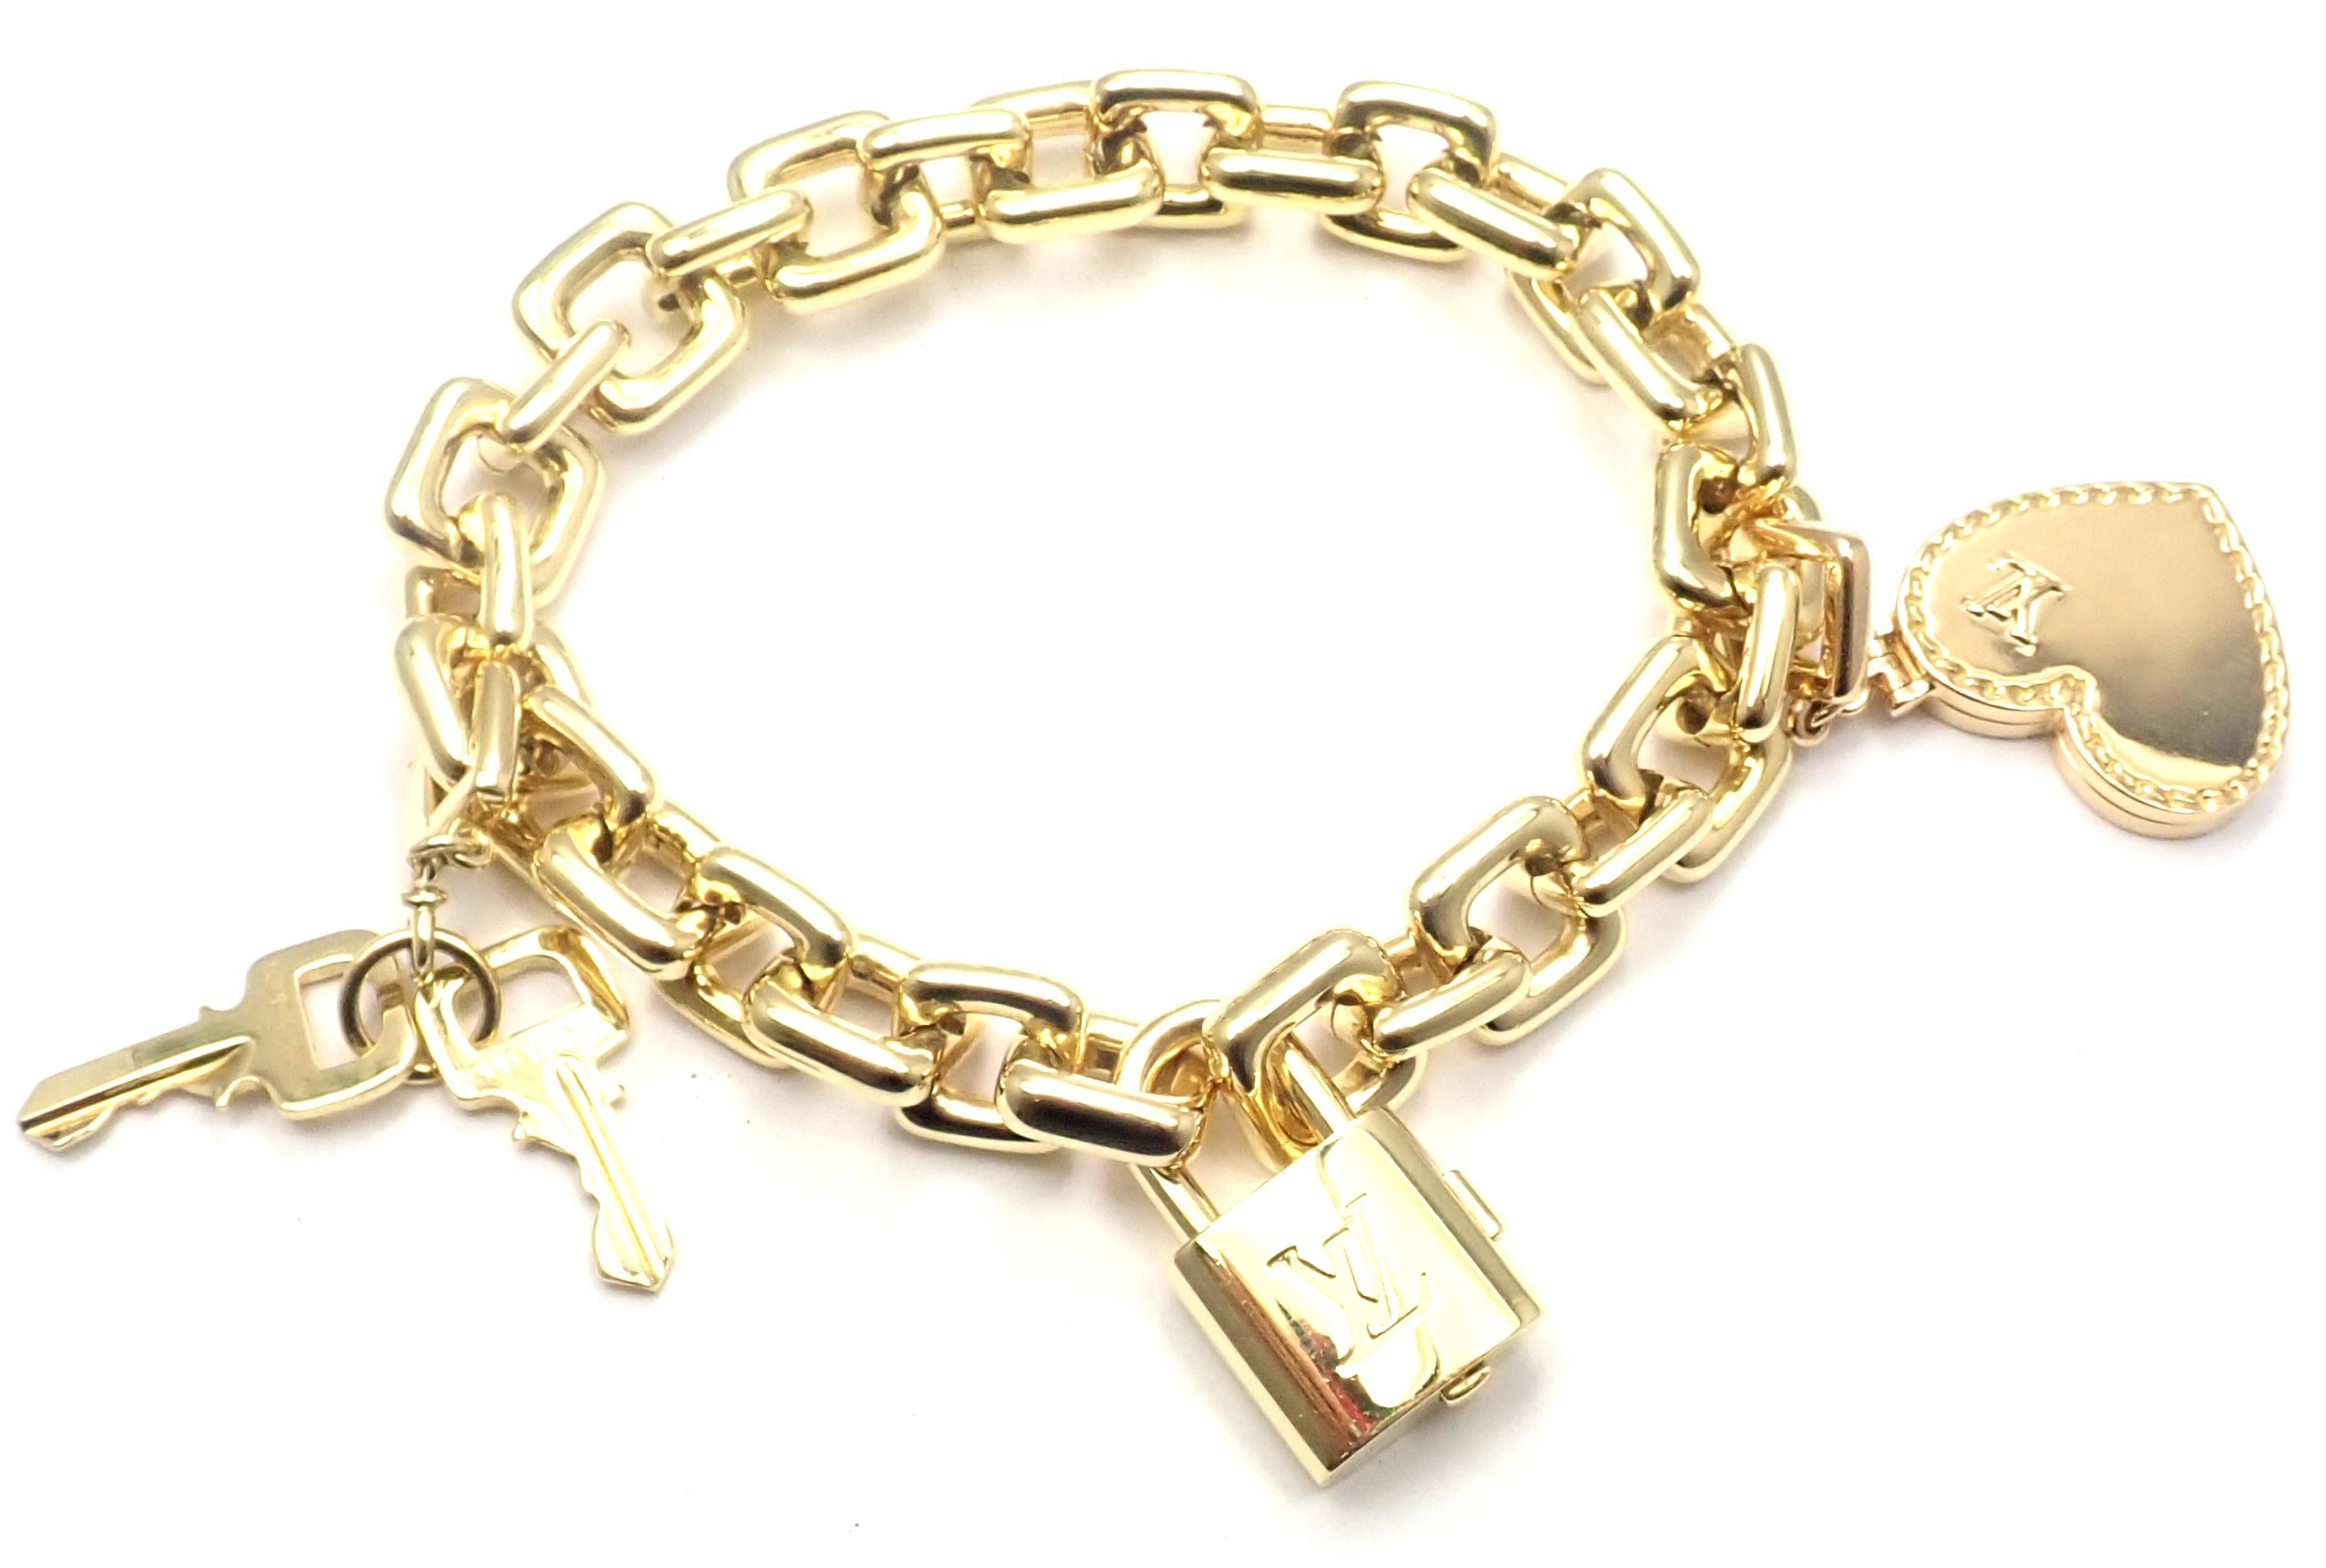 18k Yellow Gold Padlock Keys Charm And Heart Locket Charm Link Bracelet by Louis Vuitton. 
With Charms: Keys, Padlock, Heart Locket
Details: 
Length: 8